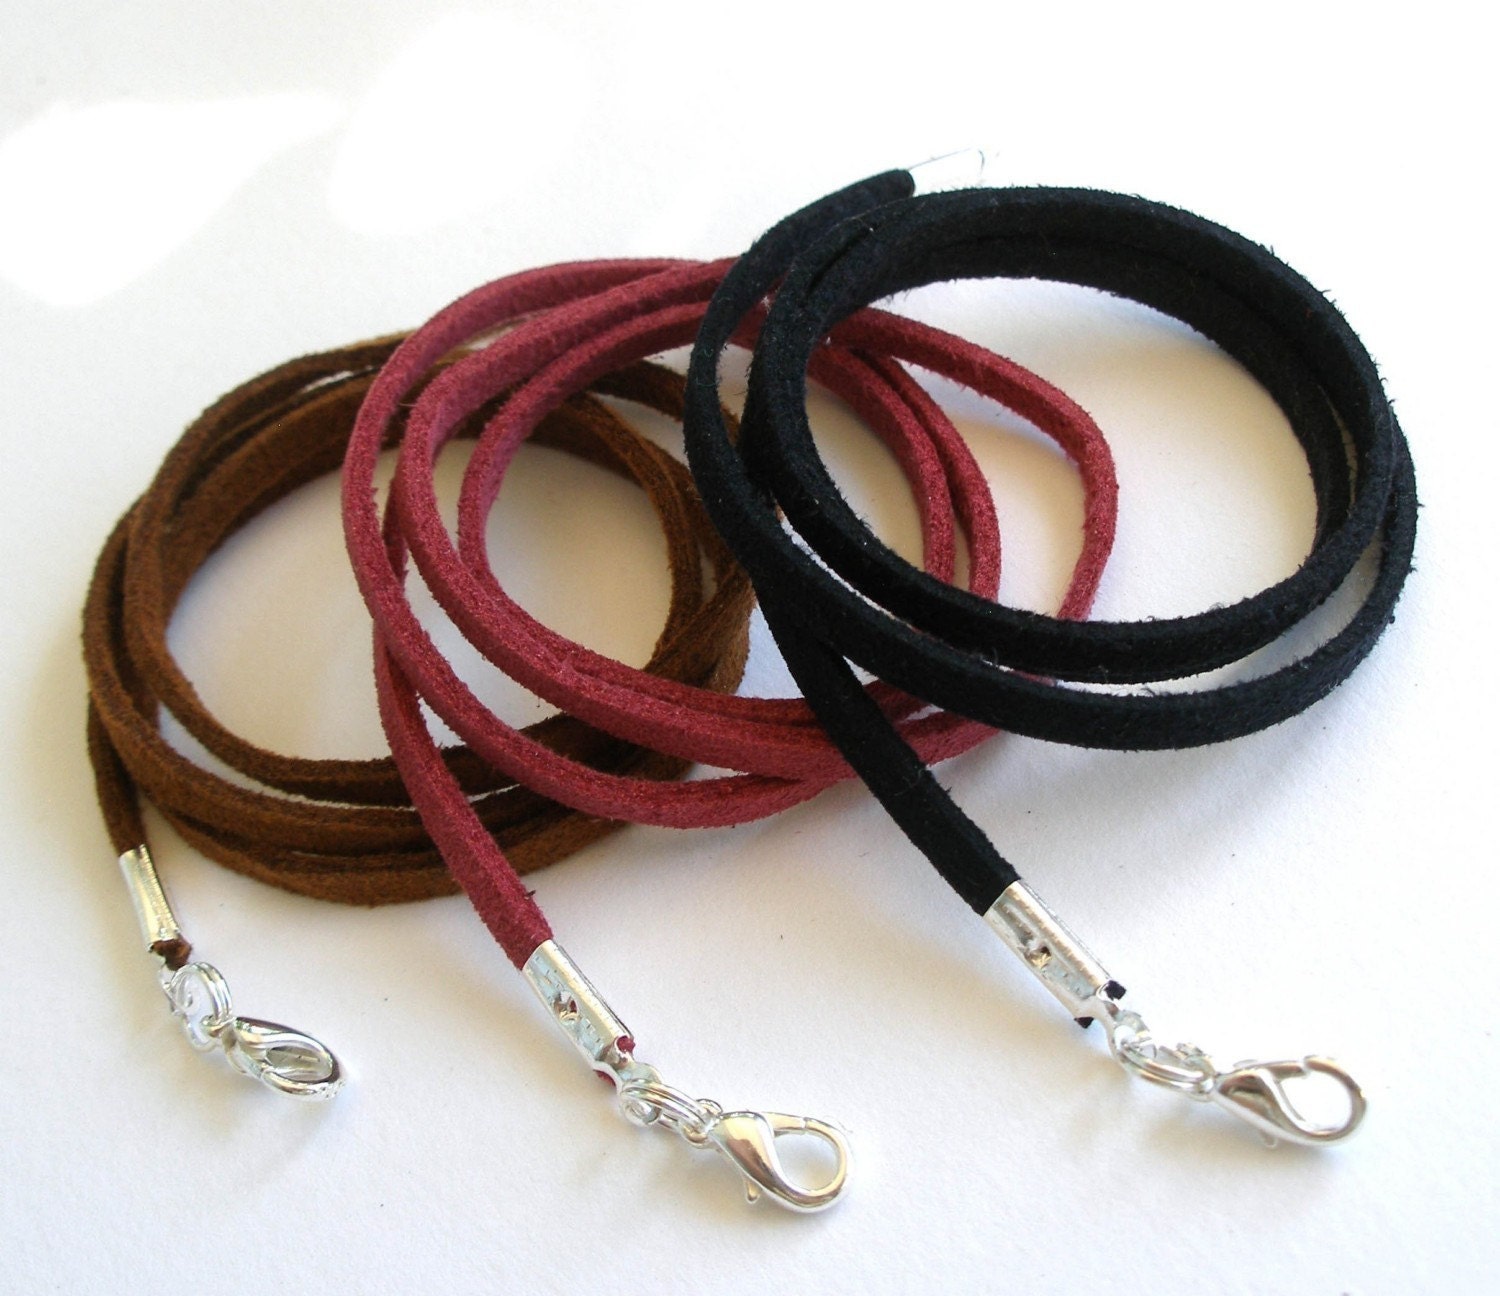 100 - Faux Suede Cord Necklaces - Any Length, 5 Colors - Use w/Aanraku Bails Scrabble/Glass tile Pendants - Handmade in USA